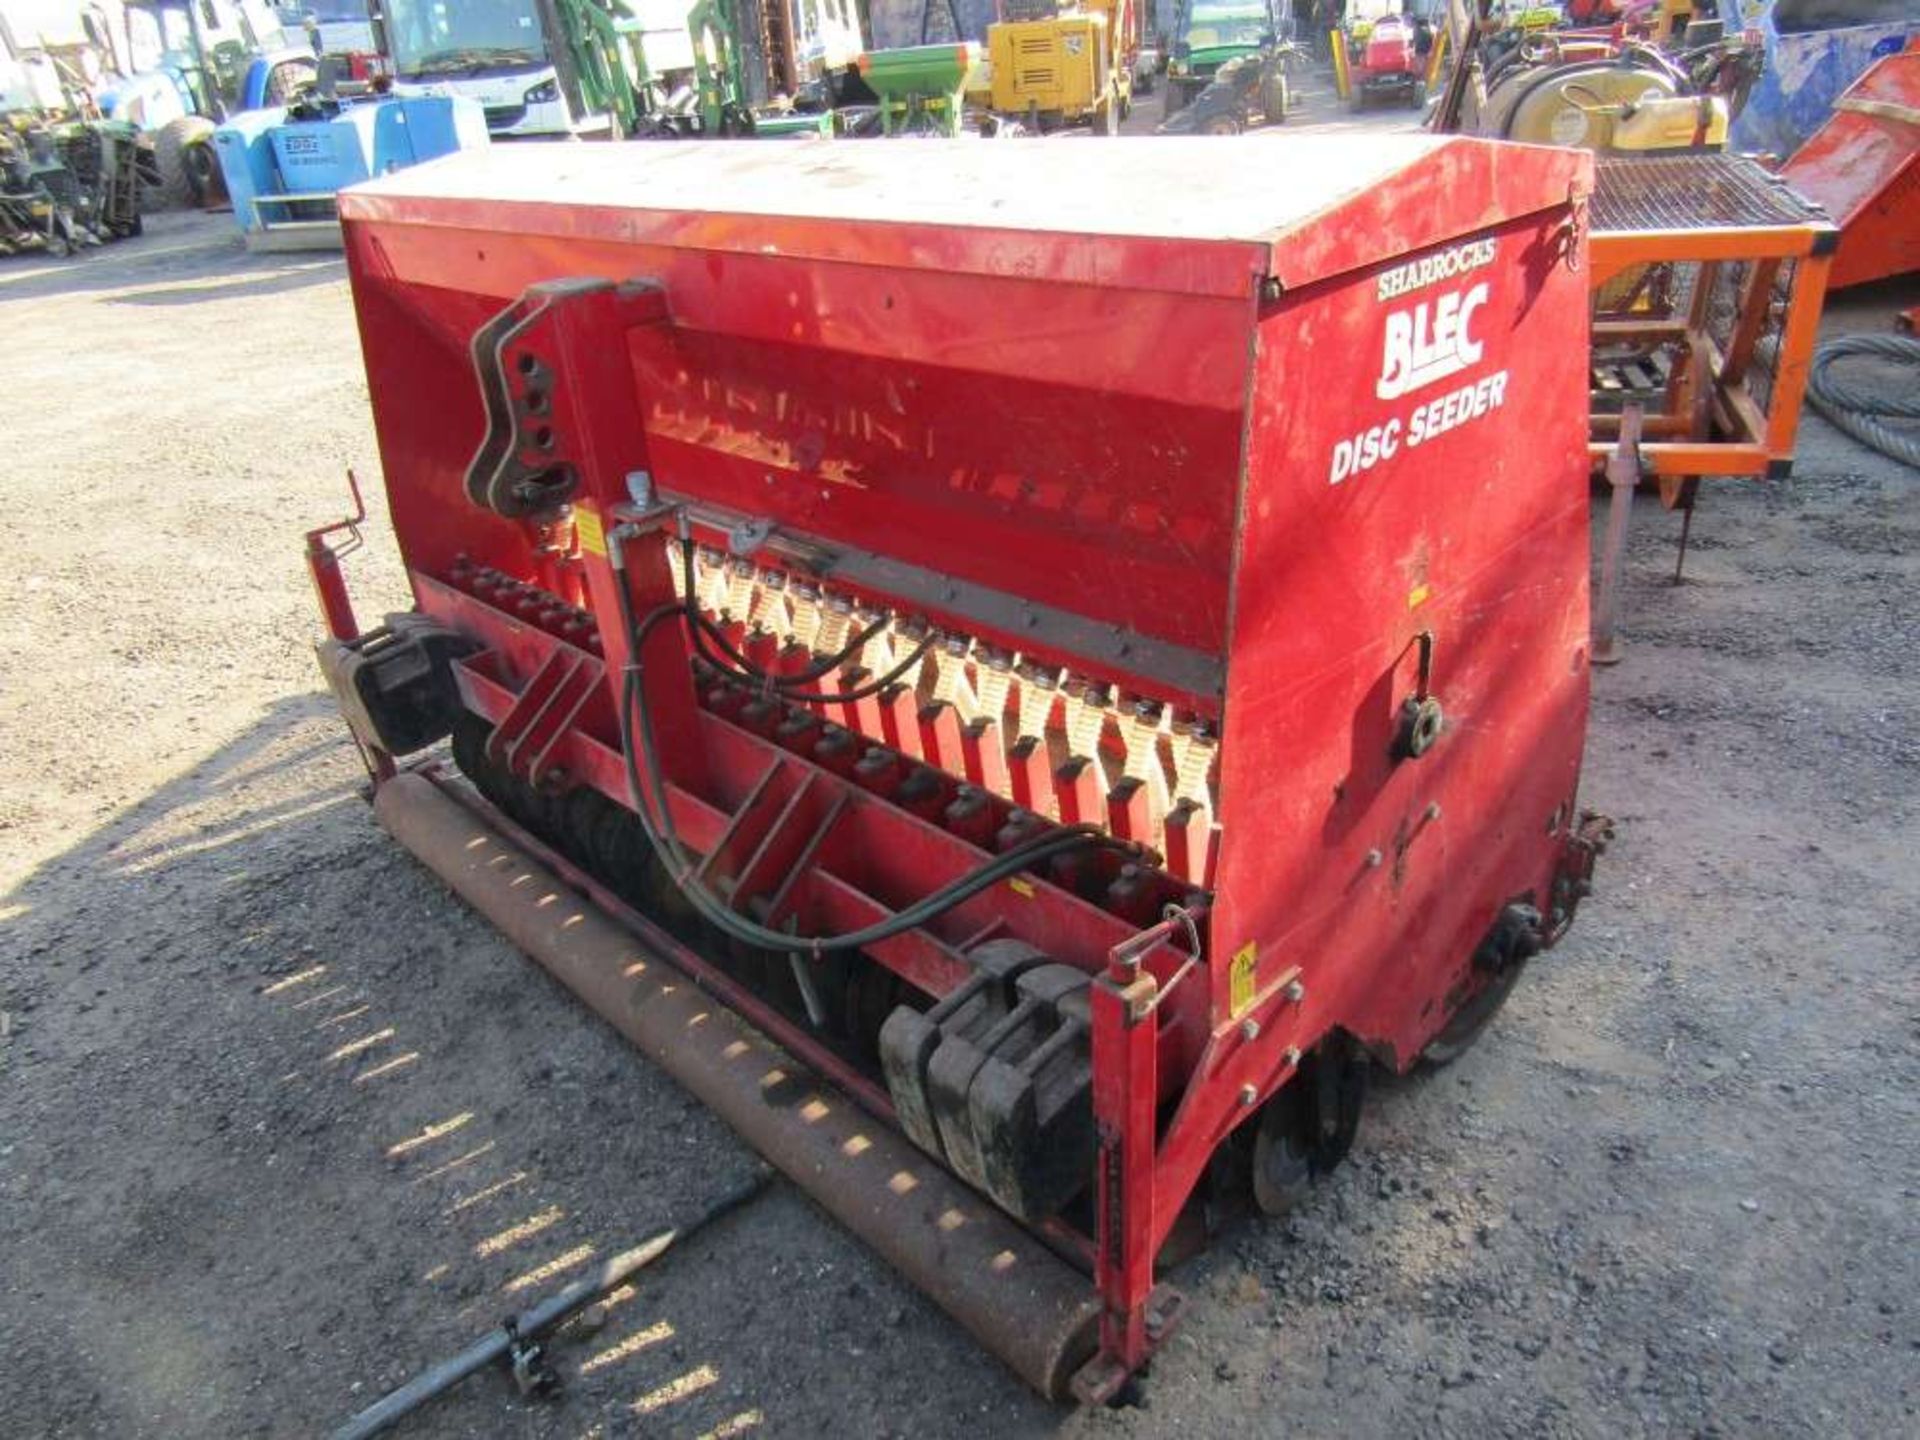 Blec Disc Seeder (Direct Council) - Image 2 of 2